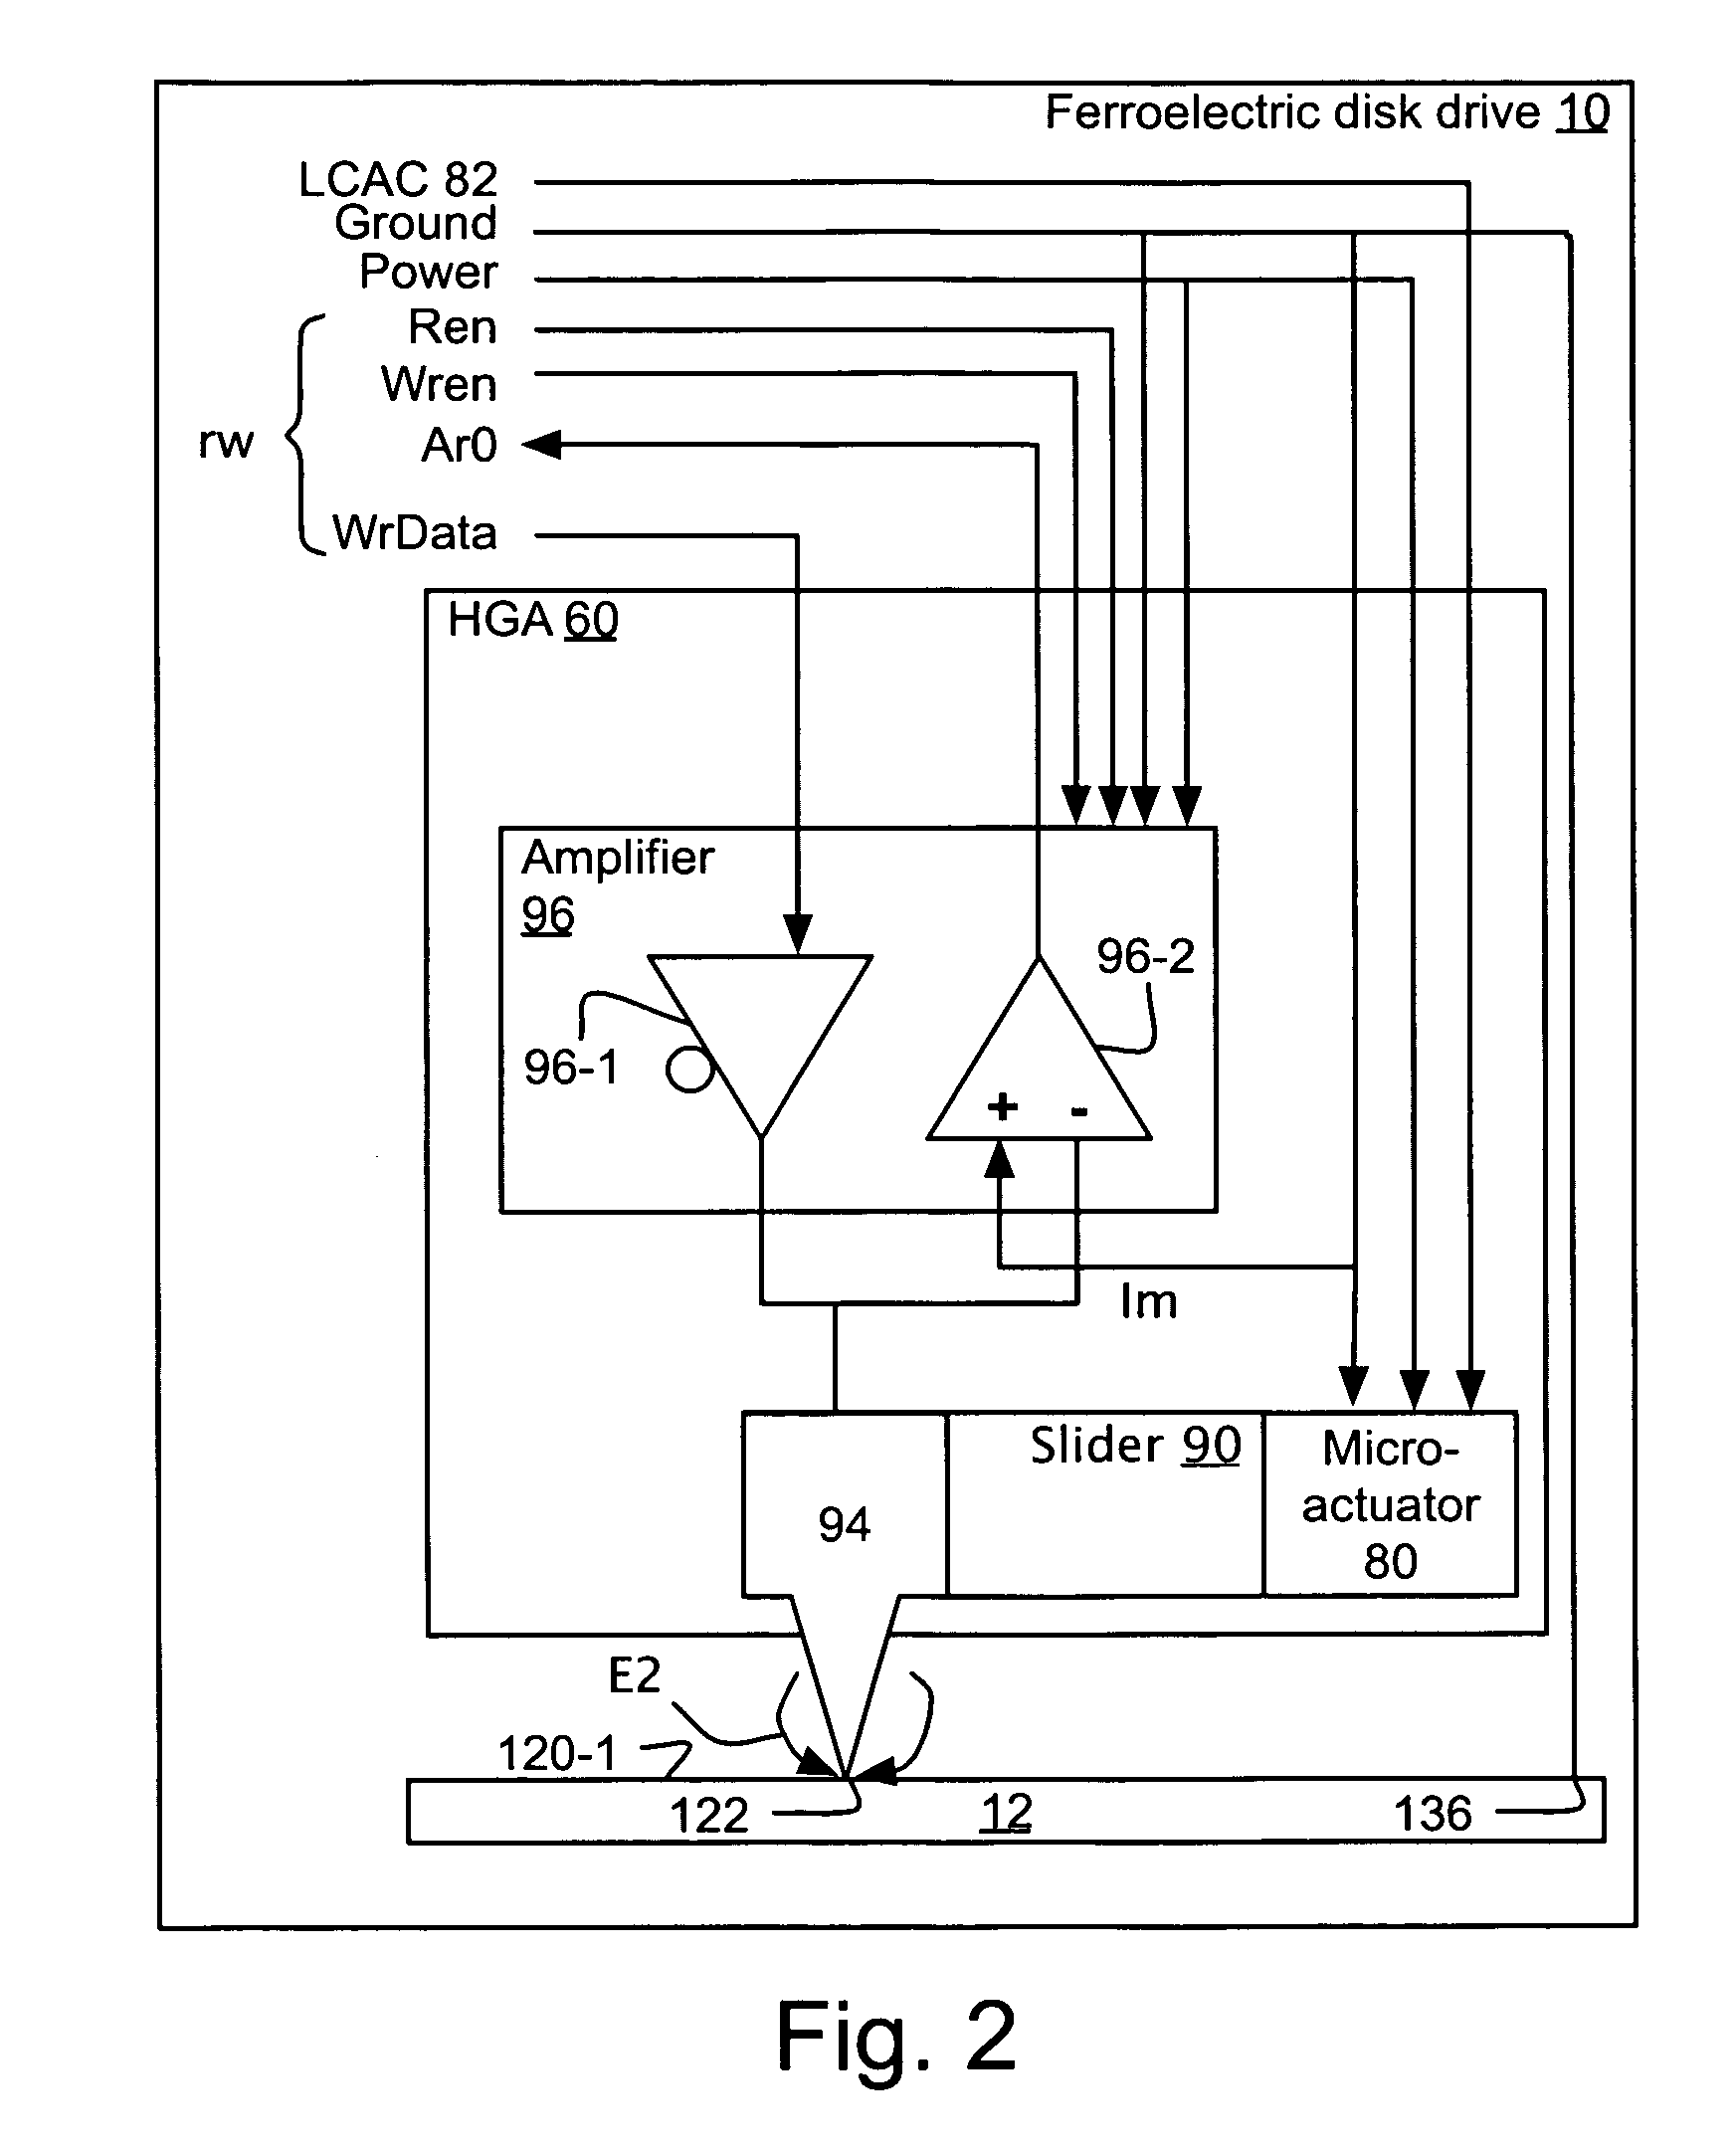 Apparatus and method for a ferroelectric disk, slider, head gimbal, actuator assemblies, and ferroelectric disk drive